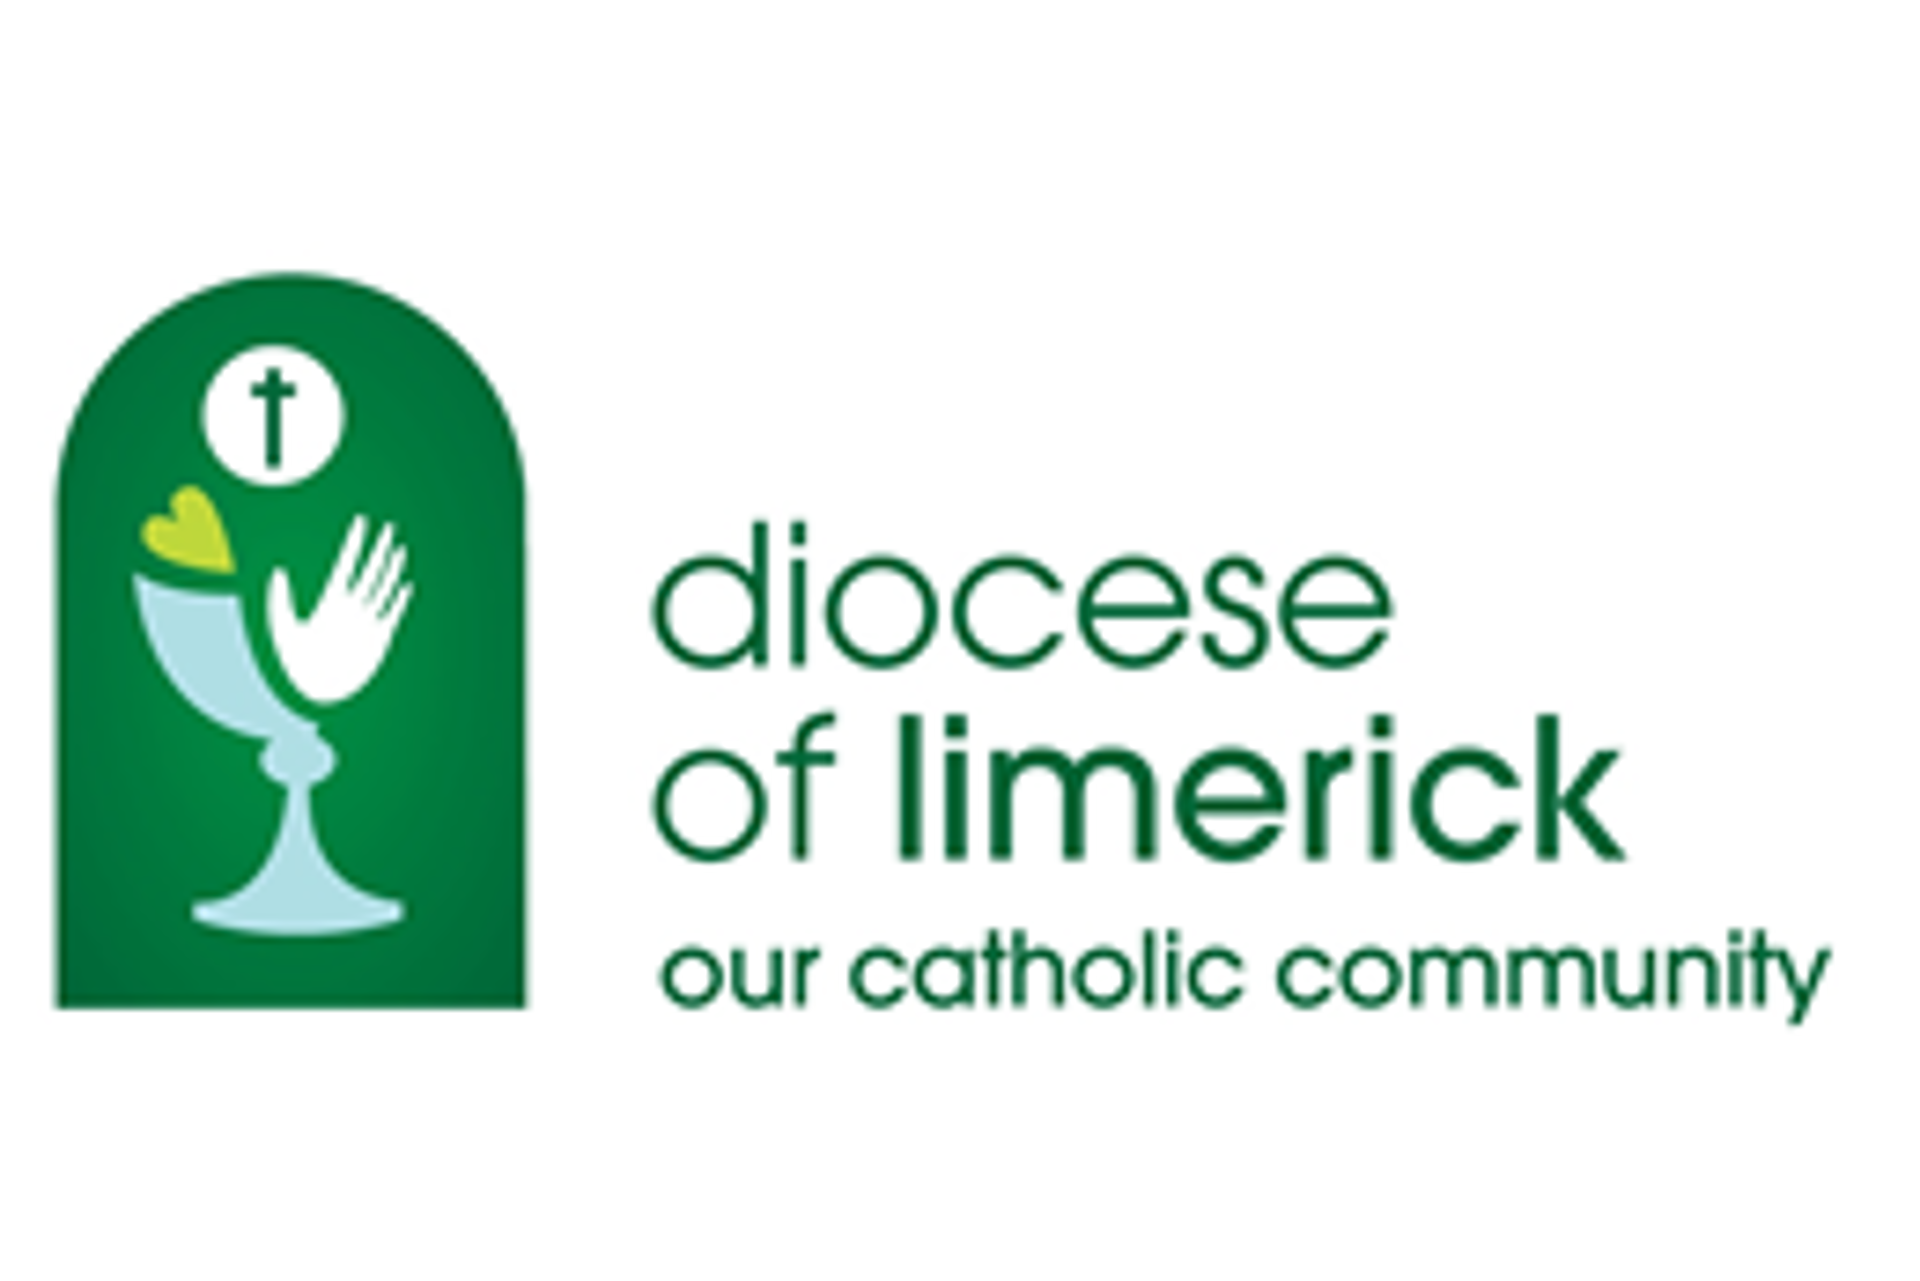 24 June 2021 - Bishop Leahy statement regarding HSE recommendations on First Holy Communion and Confirmation ceremonies  